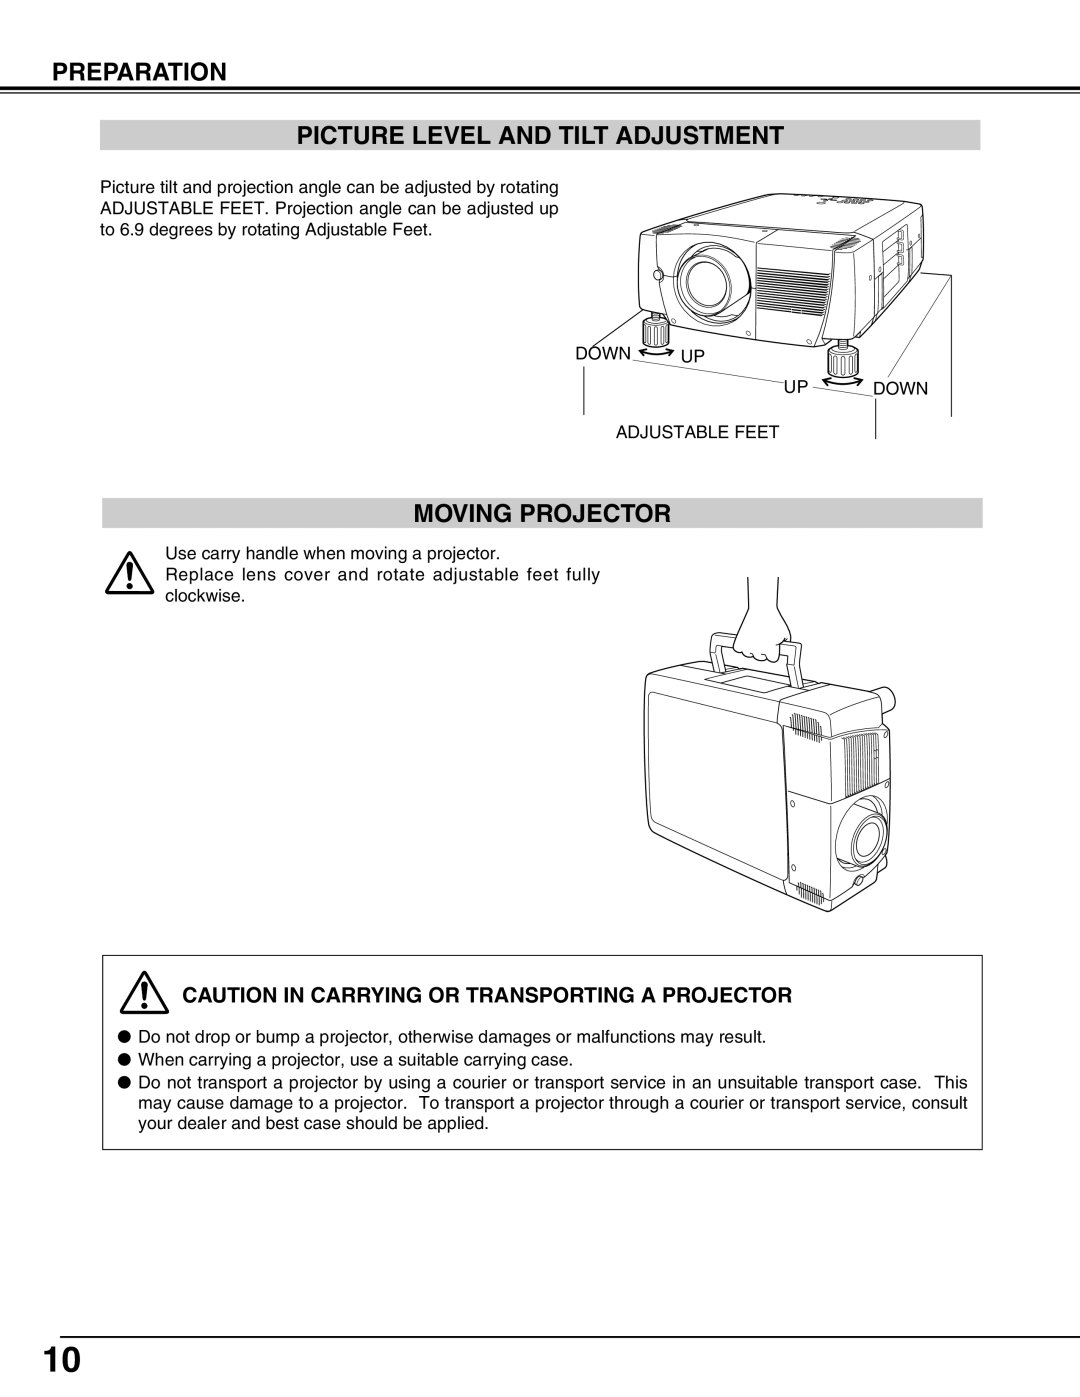 Christie Digital Systems 38-MX2001-01 user manual Preparation Picture Level And Tilt Adjustment, Moving Projector 